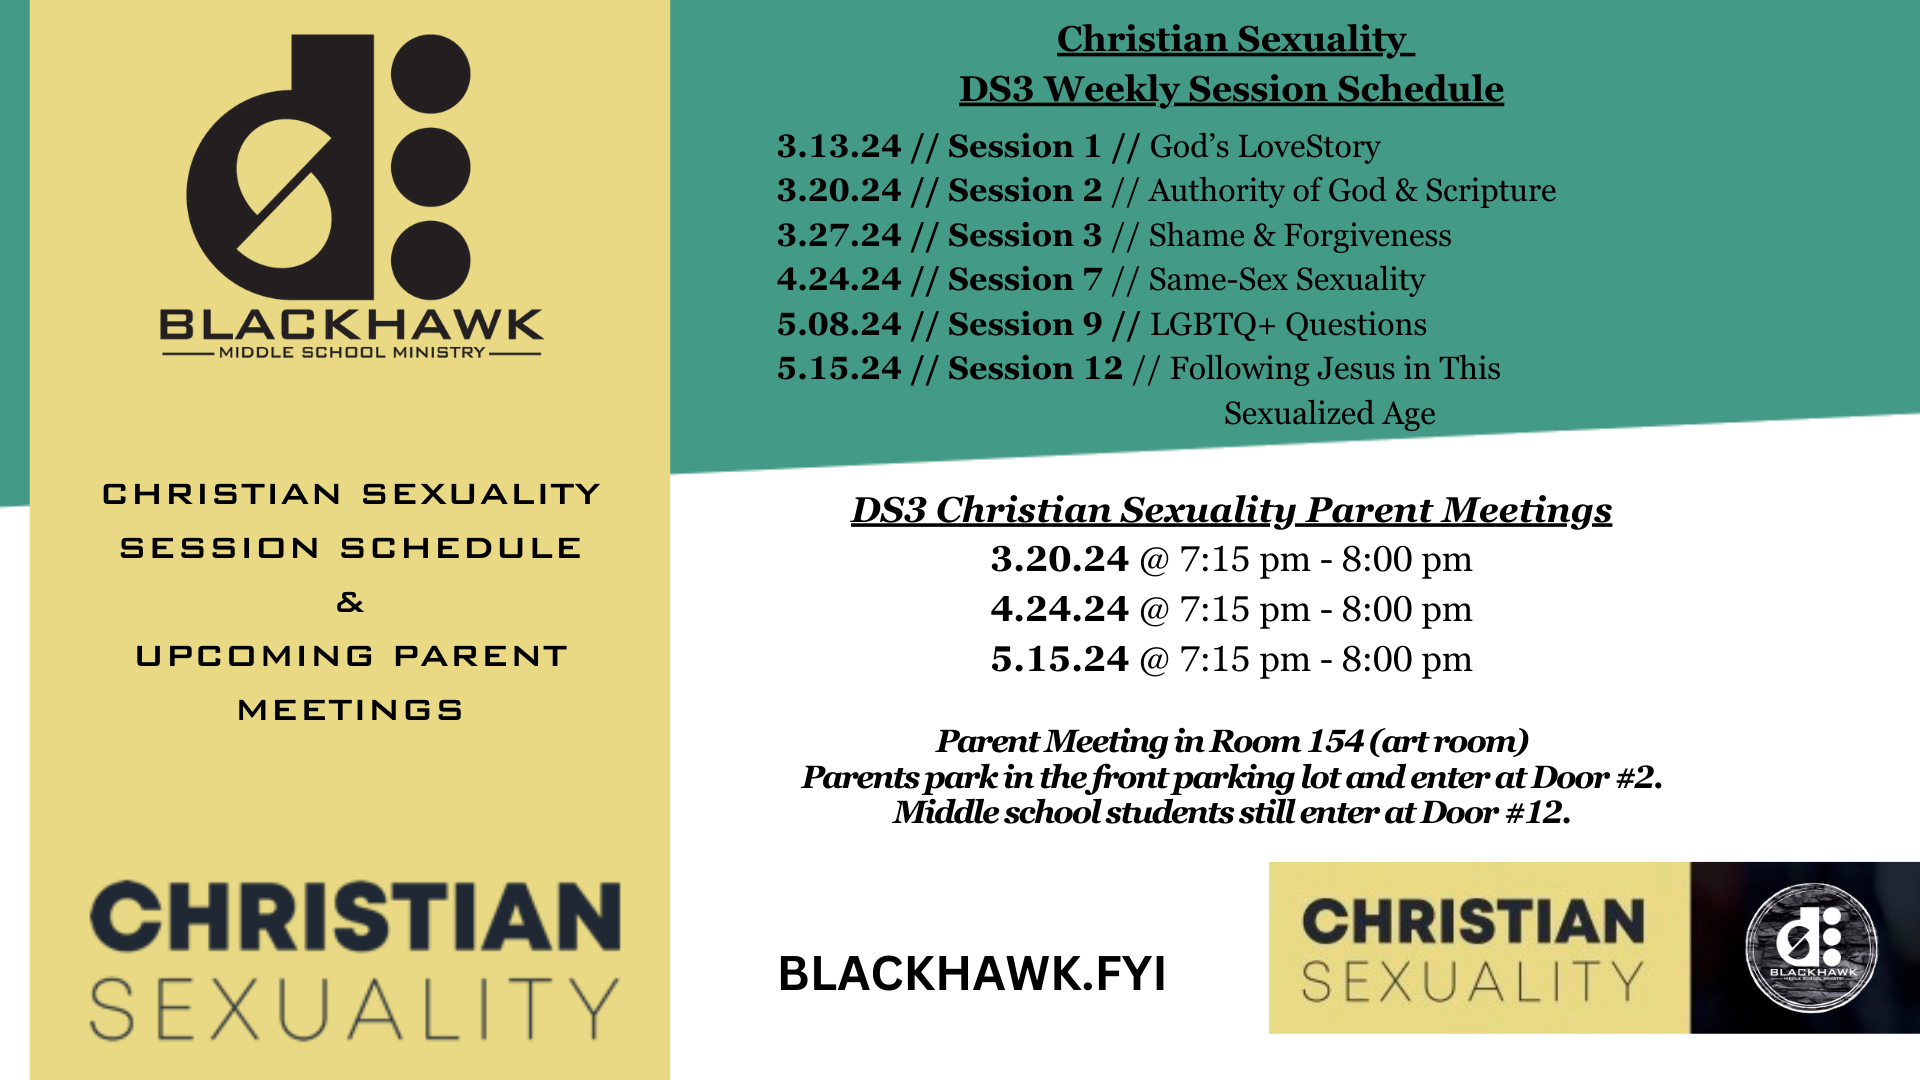 DS3 Christian Sexuality Session Schedule